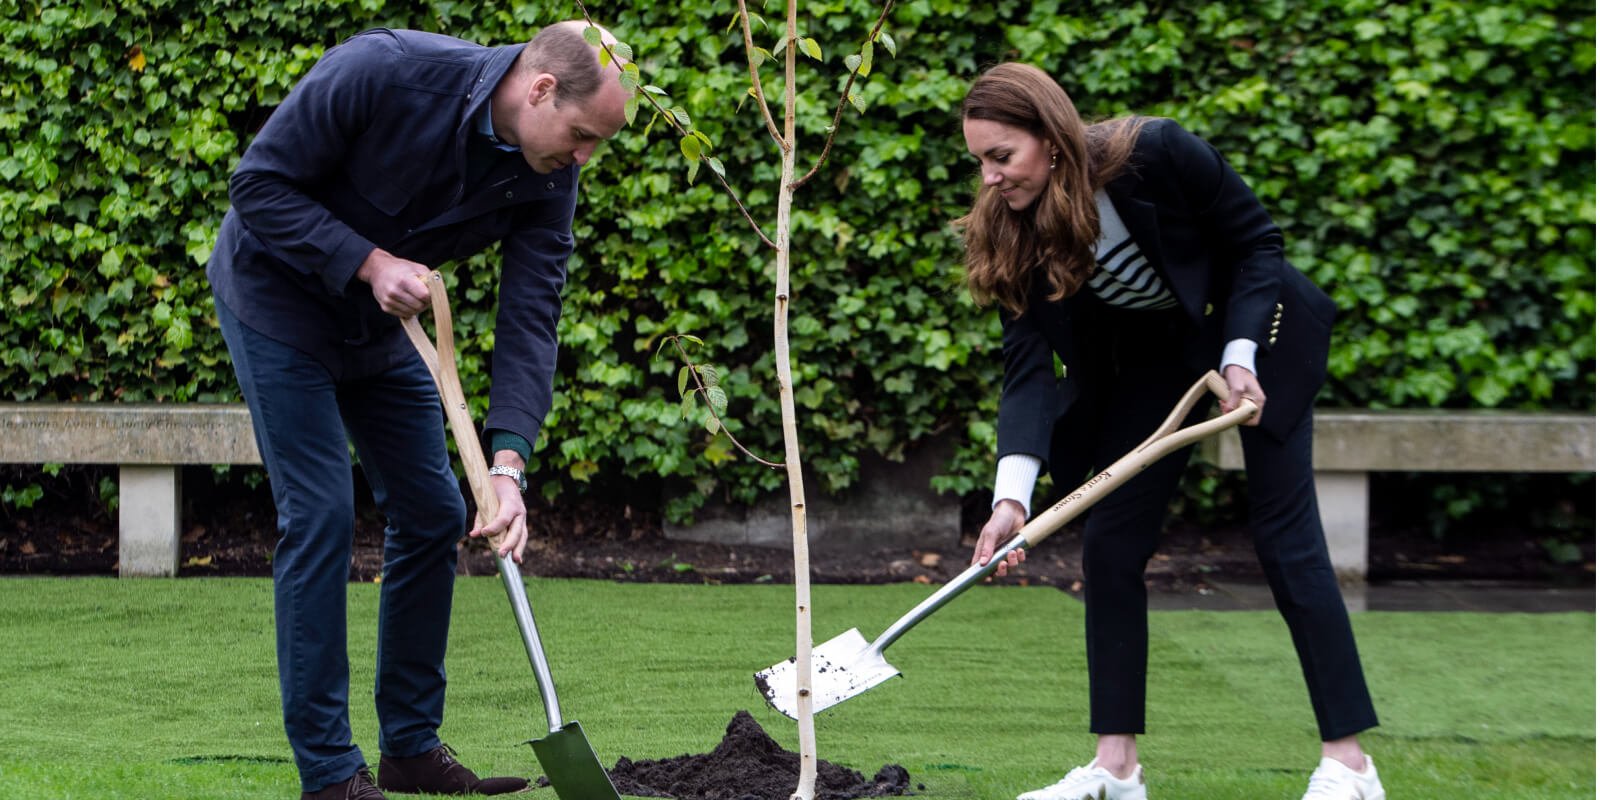 Prince William and Kate Middleton plant a tree in honor of Queen Elizabeth's initiative at ther alma mater, St. Andrews University in Scotland.